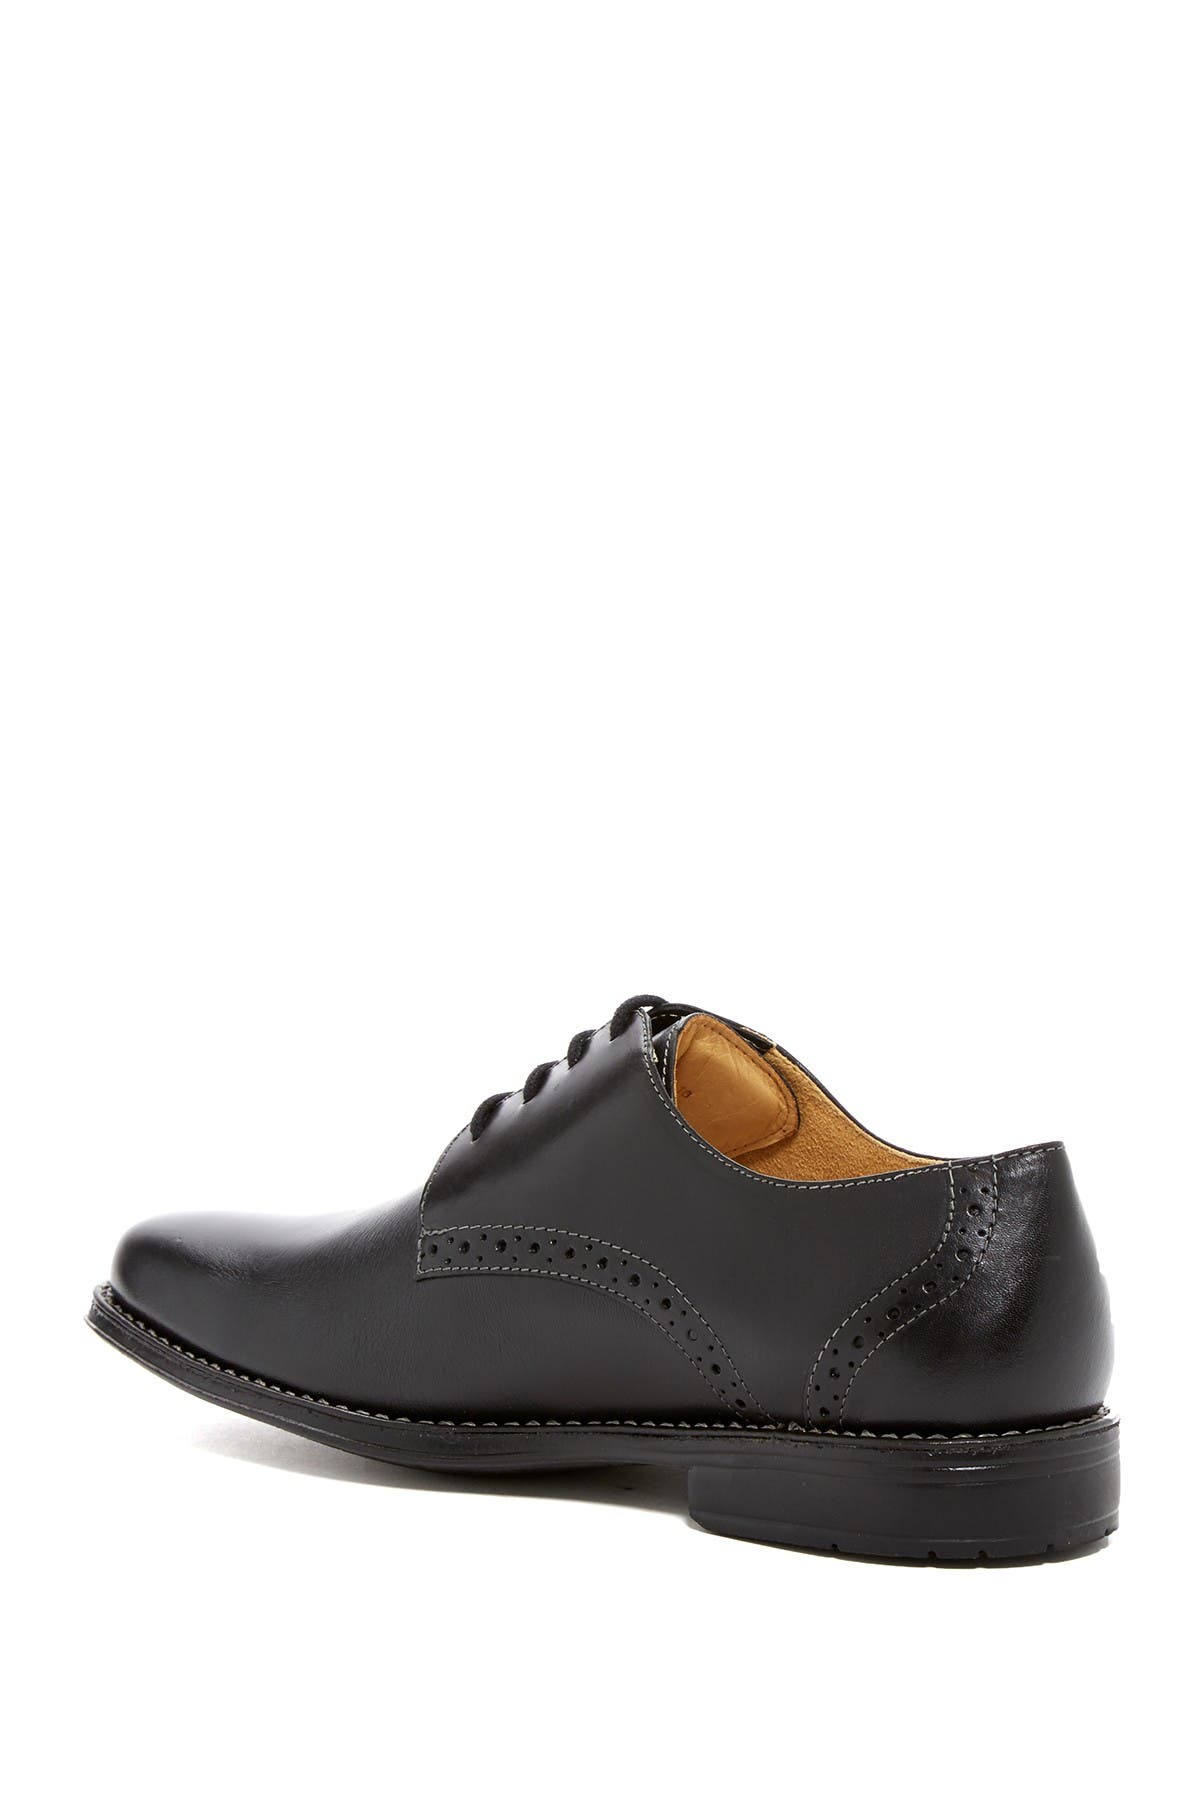 sandro moscoloni quincy leather oxford